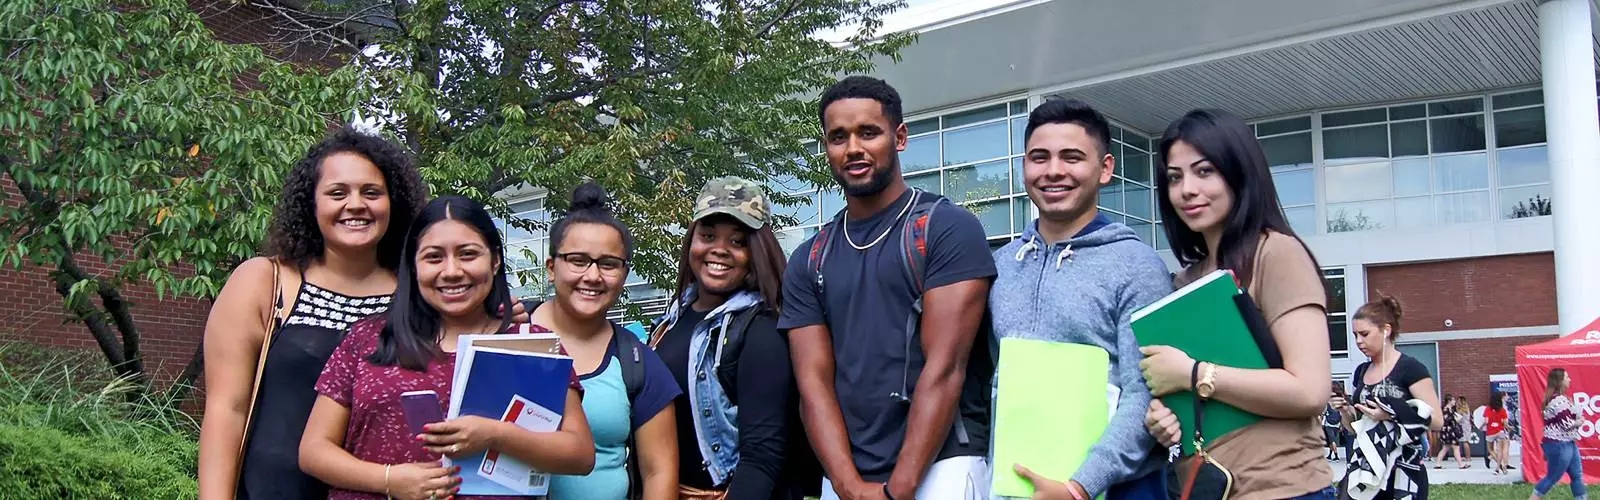 group of diverse students in front of OCC's student center